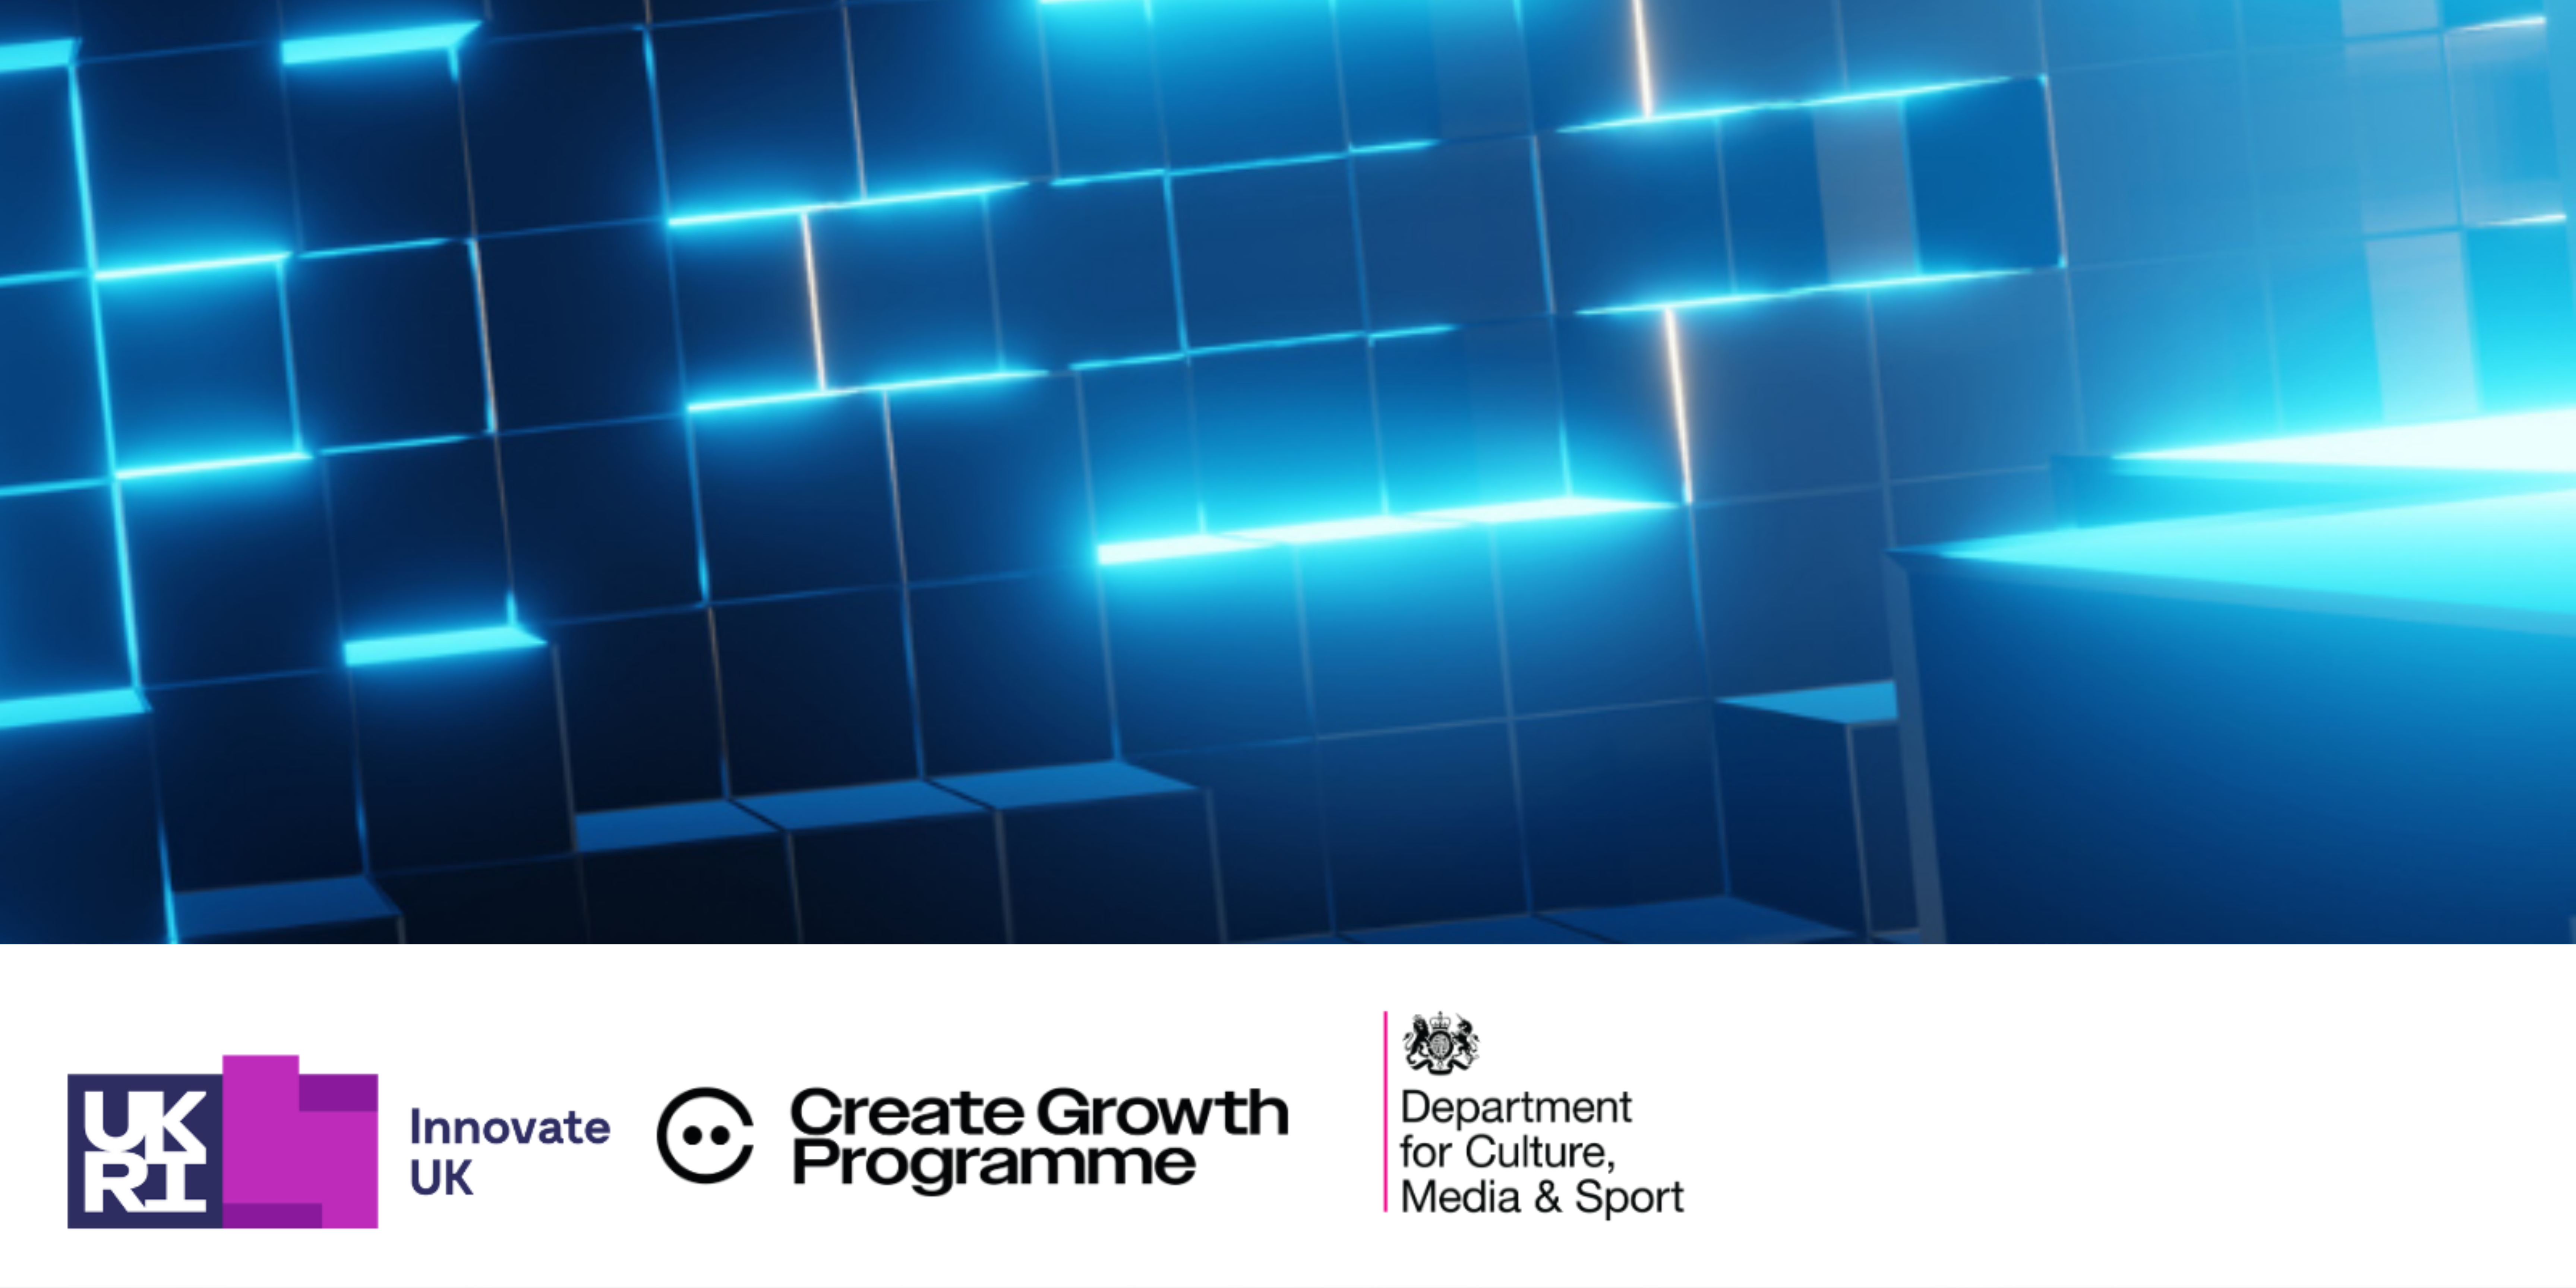 Introducing the Innovate UK’s Lunch and Learn Series: Investing in the Creative Industries Insights